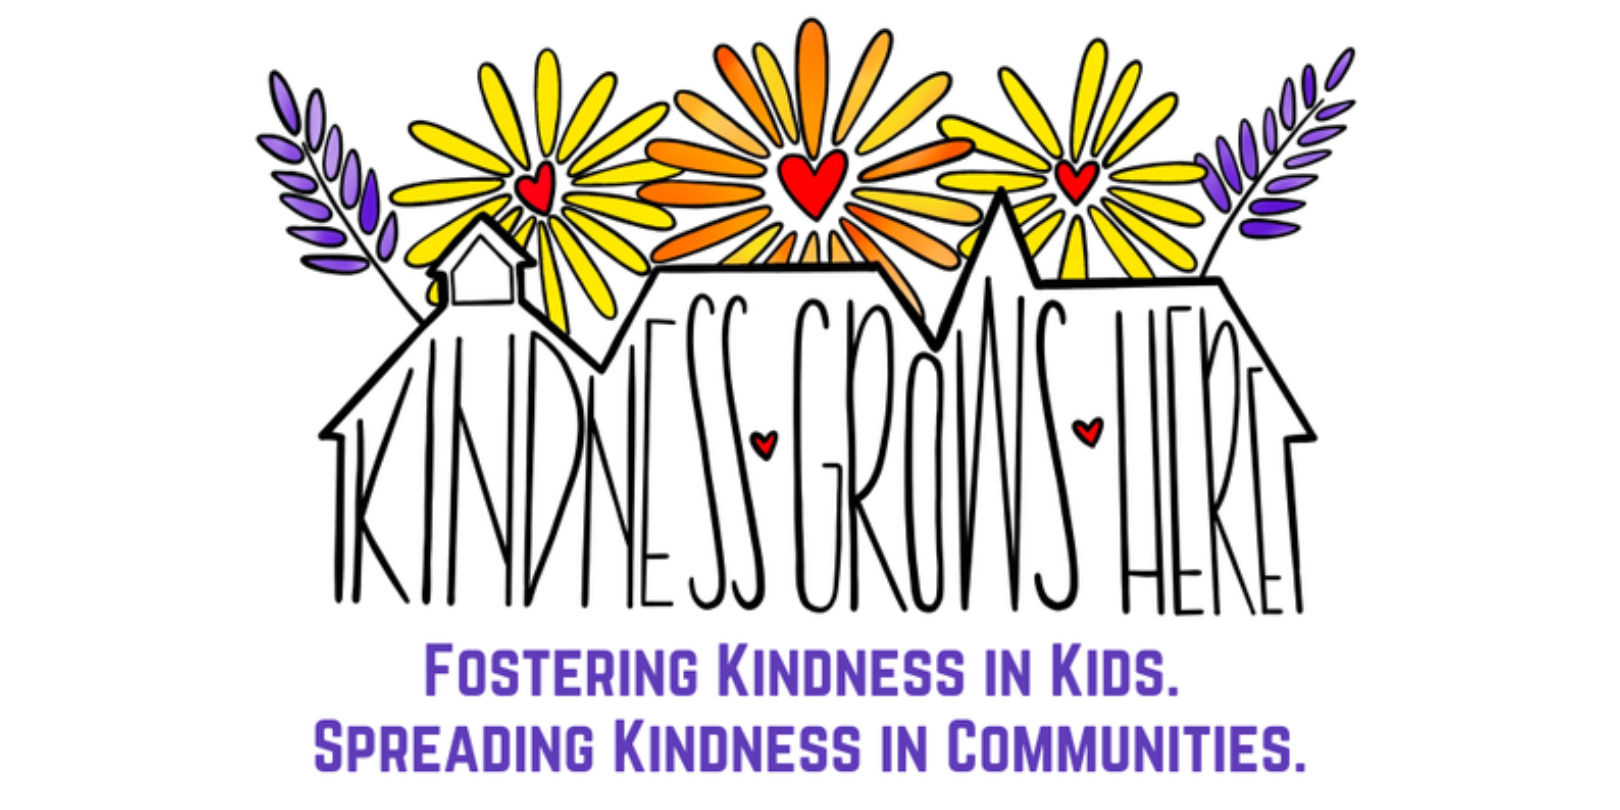 Kindness Grows Here. Fostering Kindness in Kids. Spreading Kindness in Communities.